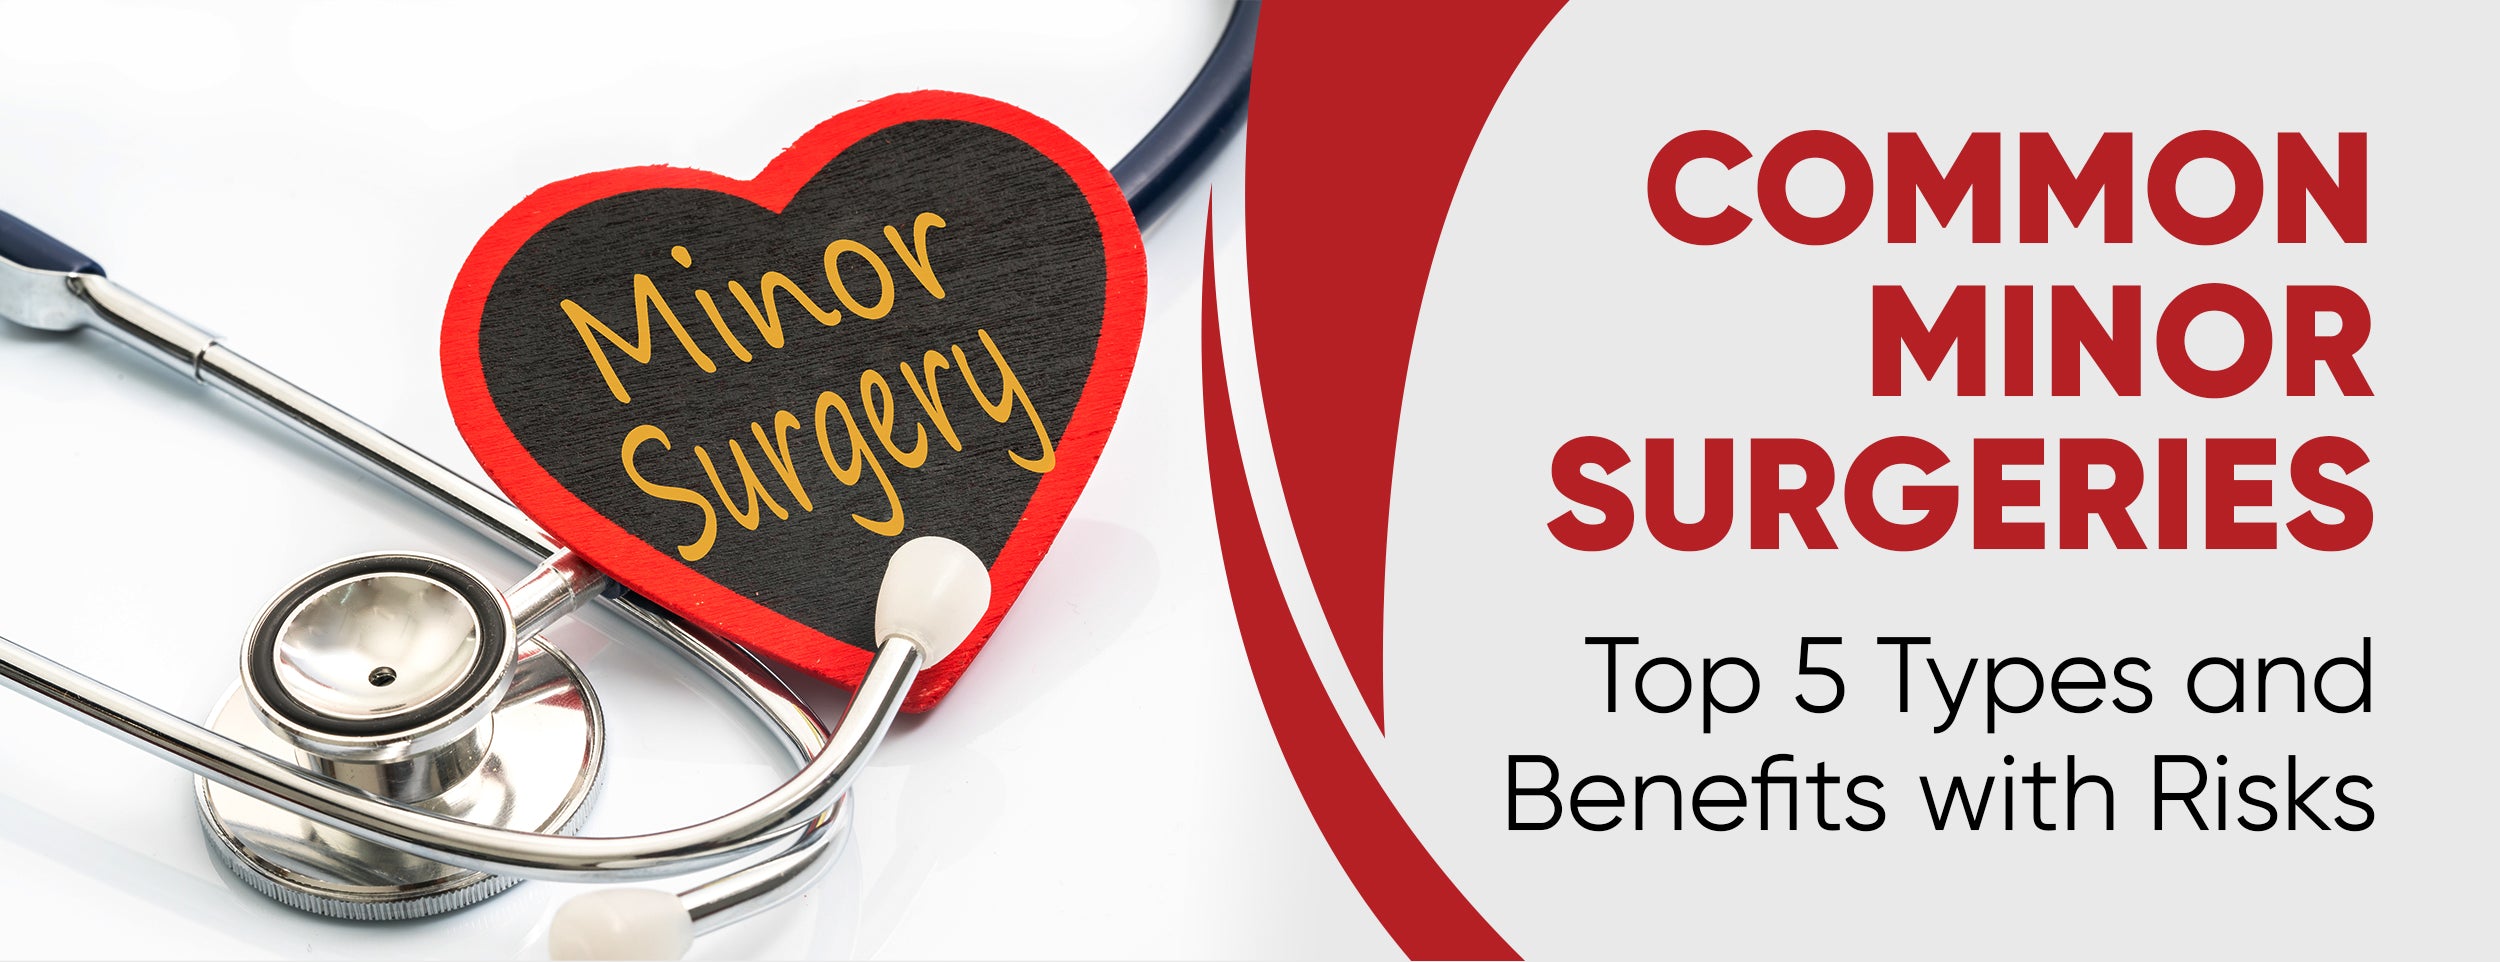 Top 5 Minor Surgeries and their benefits & risks